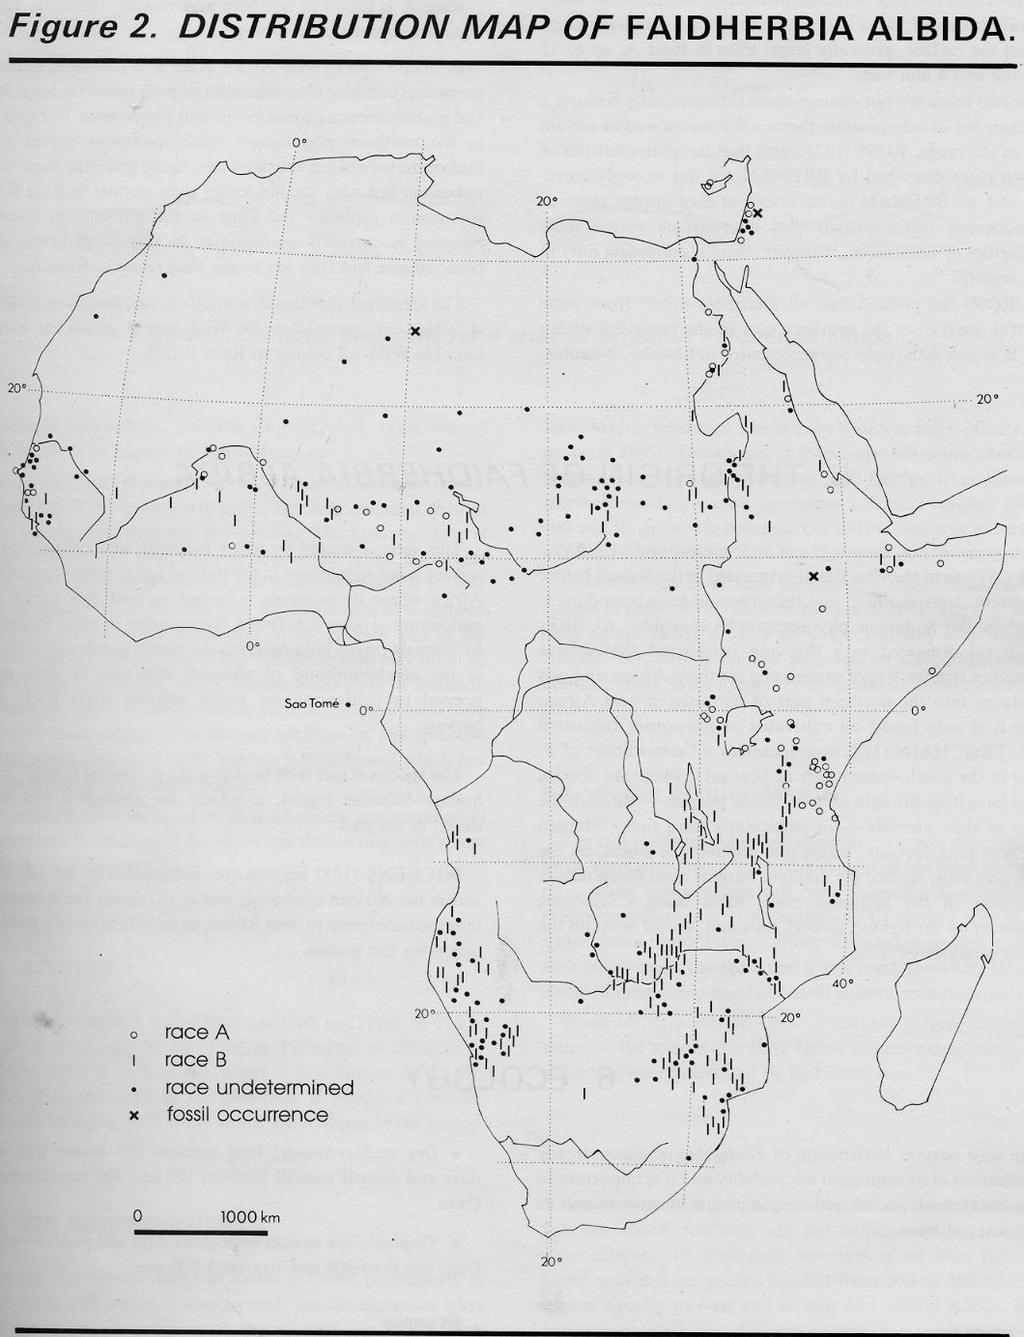 Distribution Faidherbia is widely distributed with high ecological adaptability. Across the Sahel from the Atlantic to the Red Sea. Across Namibia and Southern Angola.